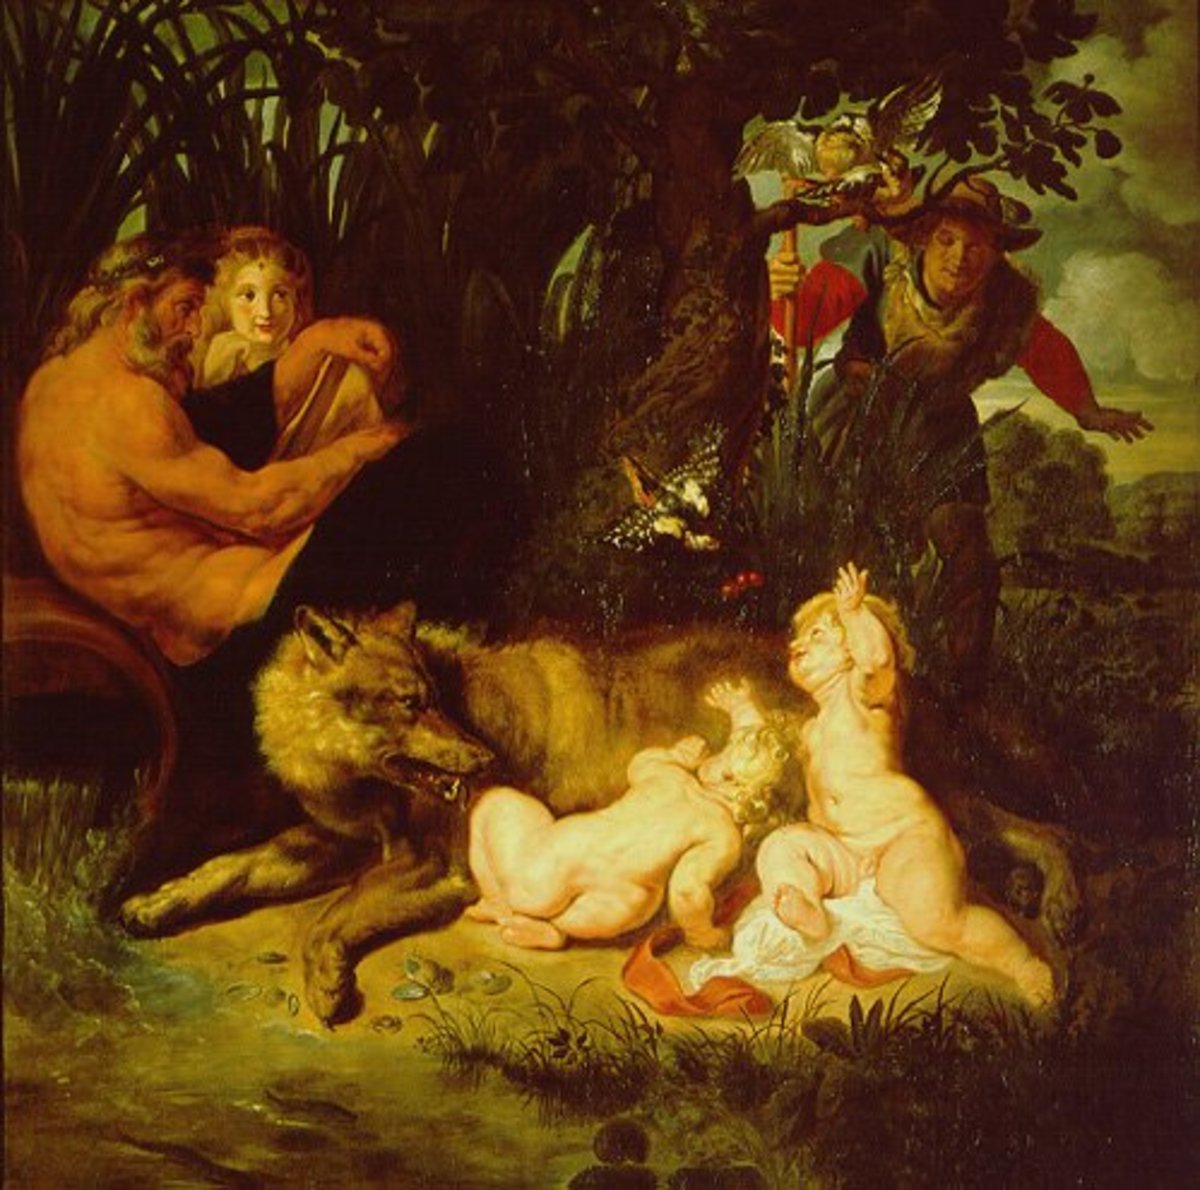 Romulus and Remus with their Wolf-mother